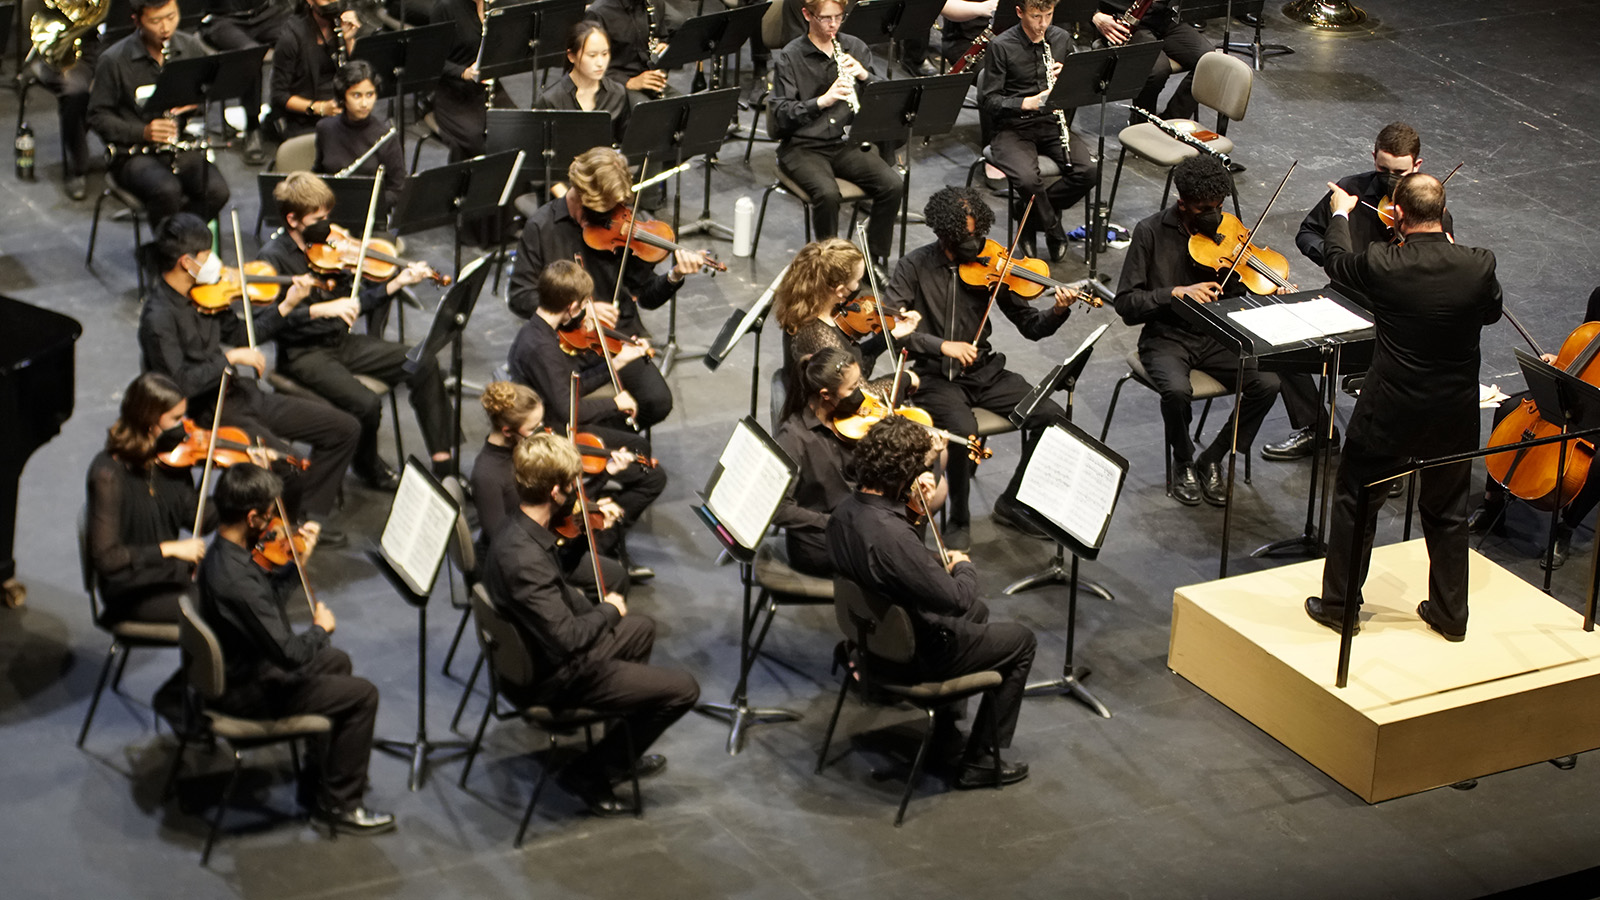 String section performing in Spain